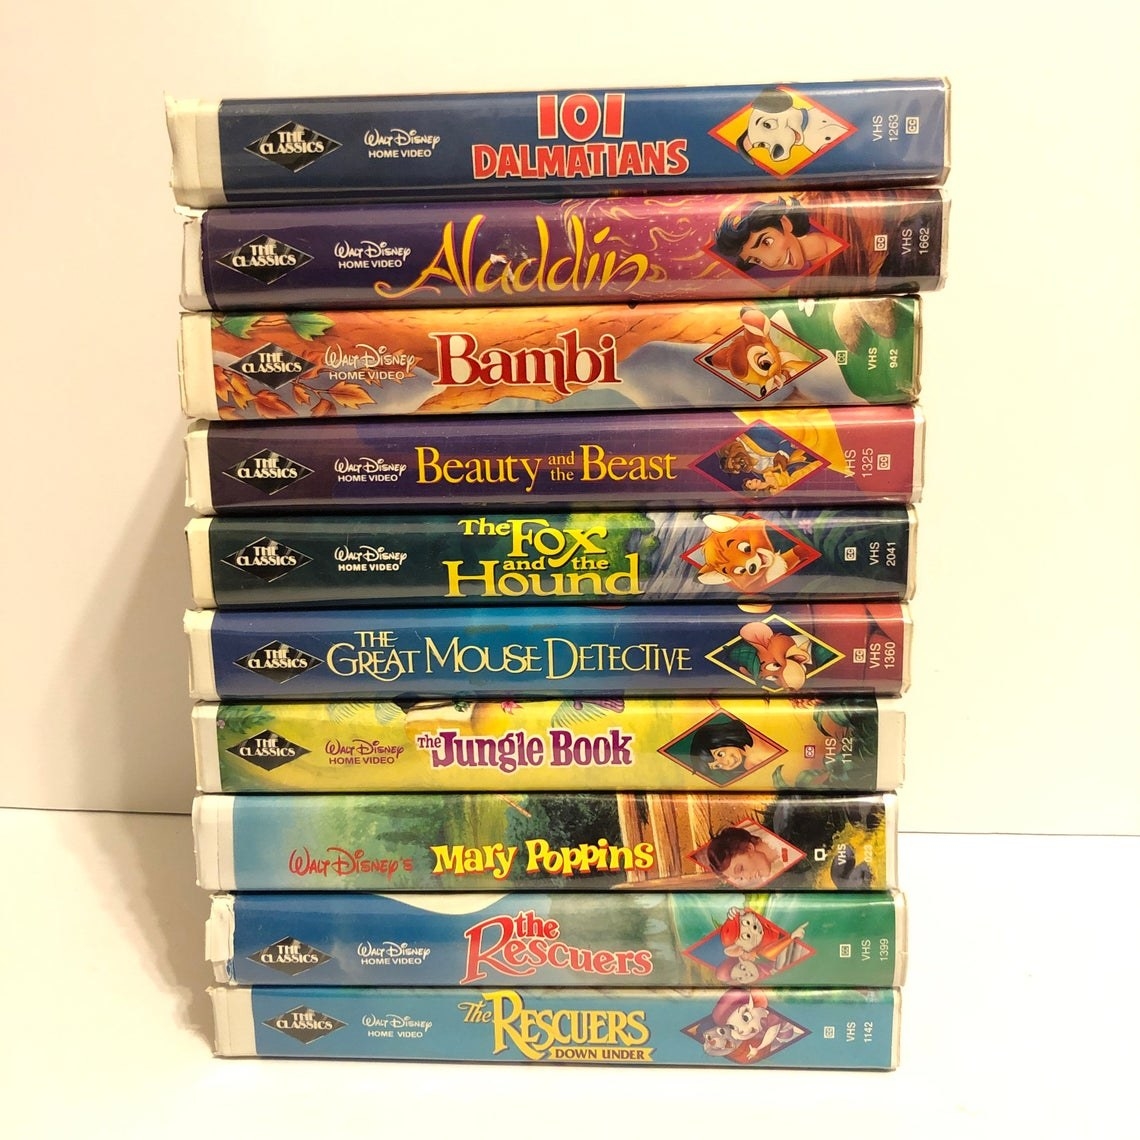 Stacked Disney VHS clam cases